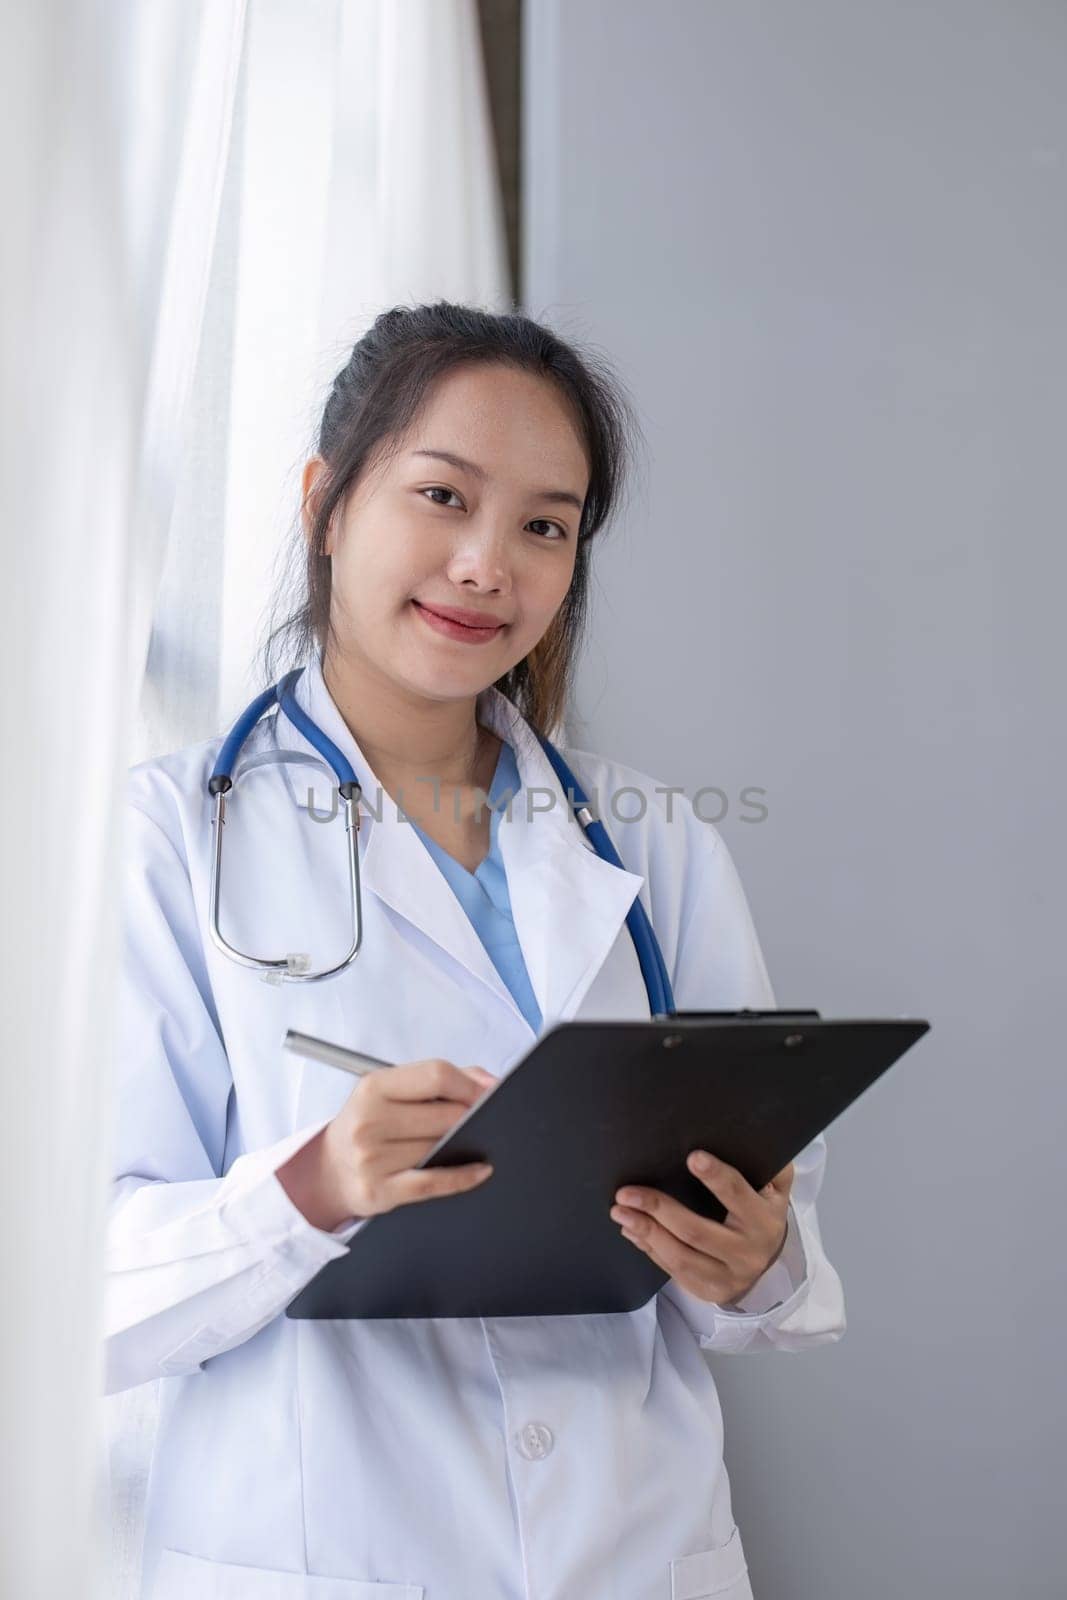 Portrait of female doctor wearing white coat with stethoscope holding clipboard and looking confidently to camera.